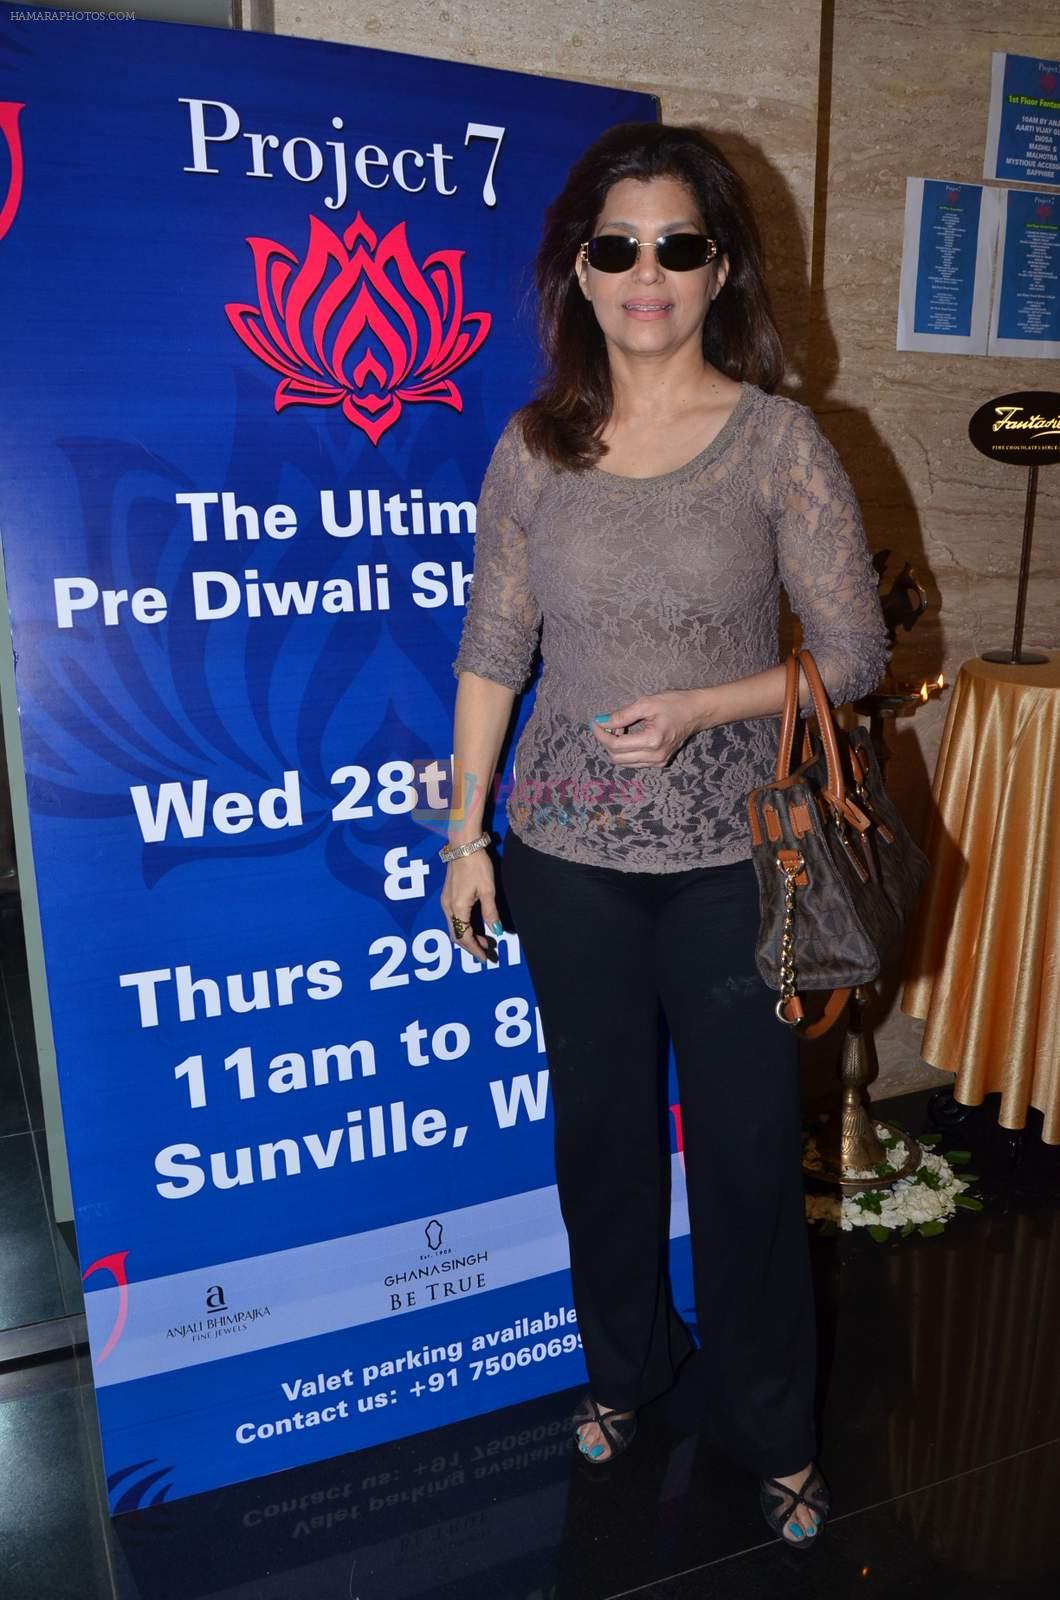 at project 7 Event on 28th Oct 2015